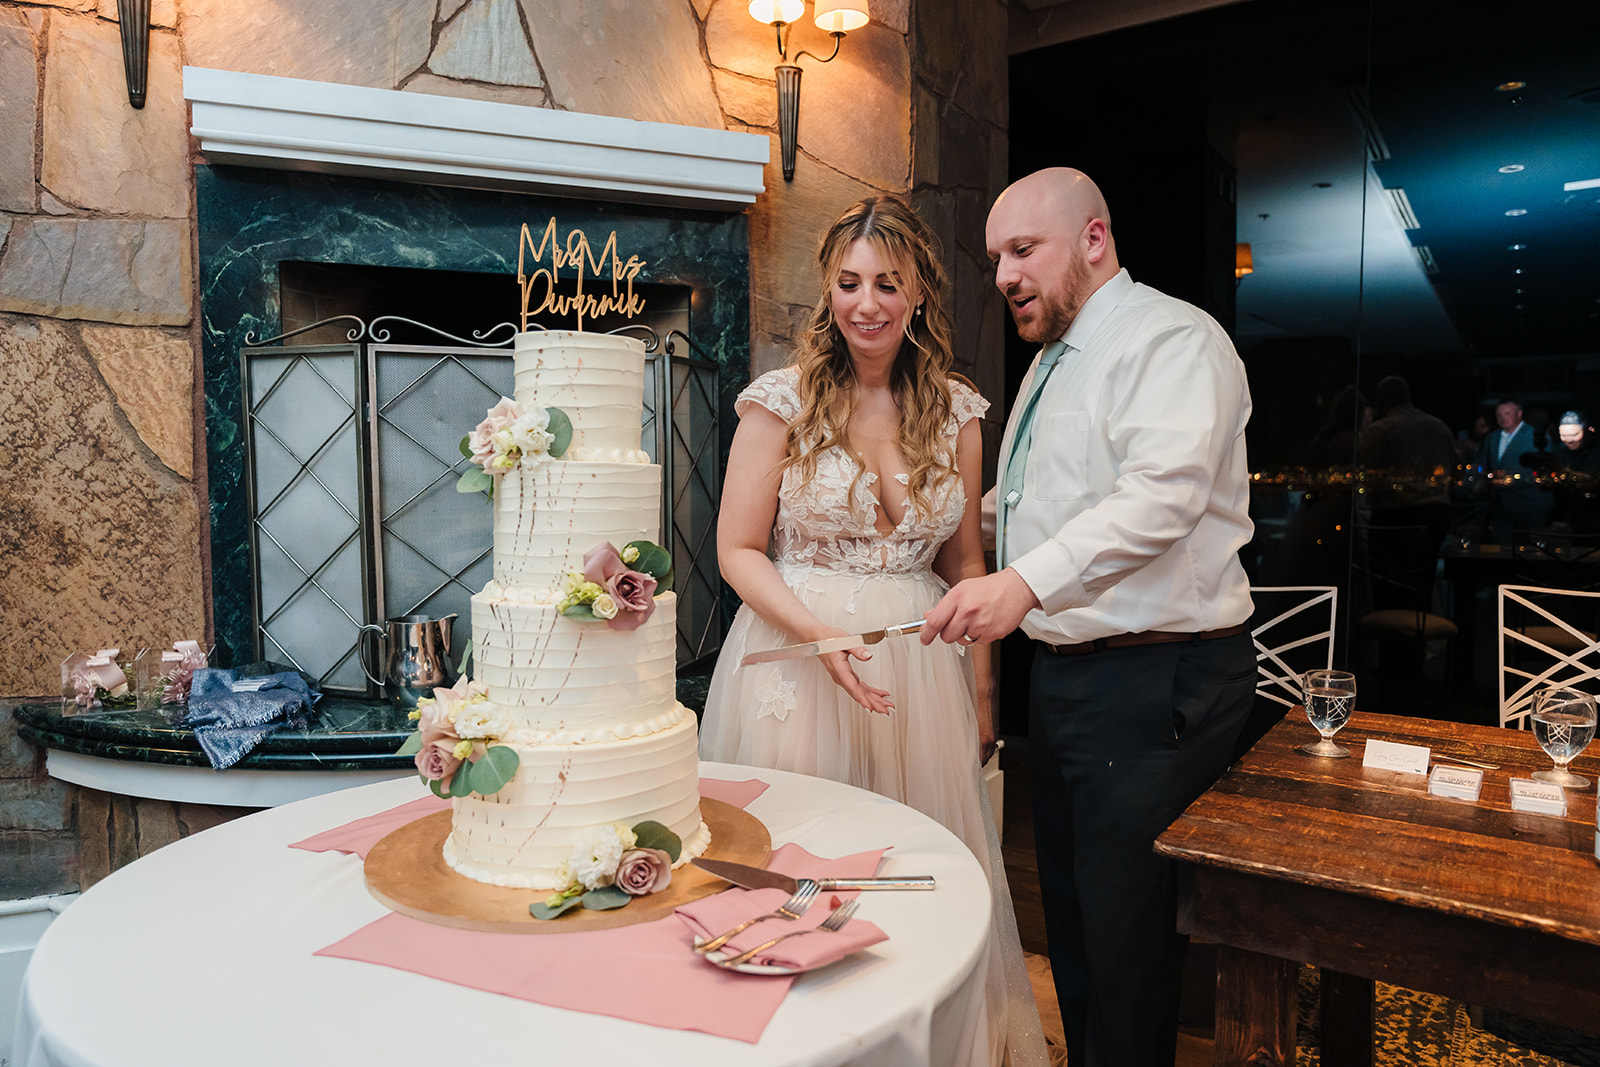 Newlywed cutting their wedding cake during the reception at revere golf club in Las Vegas